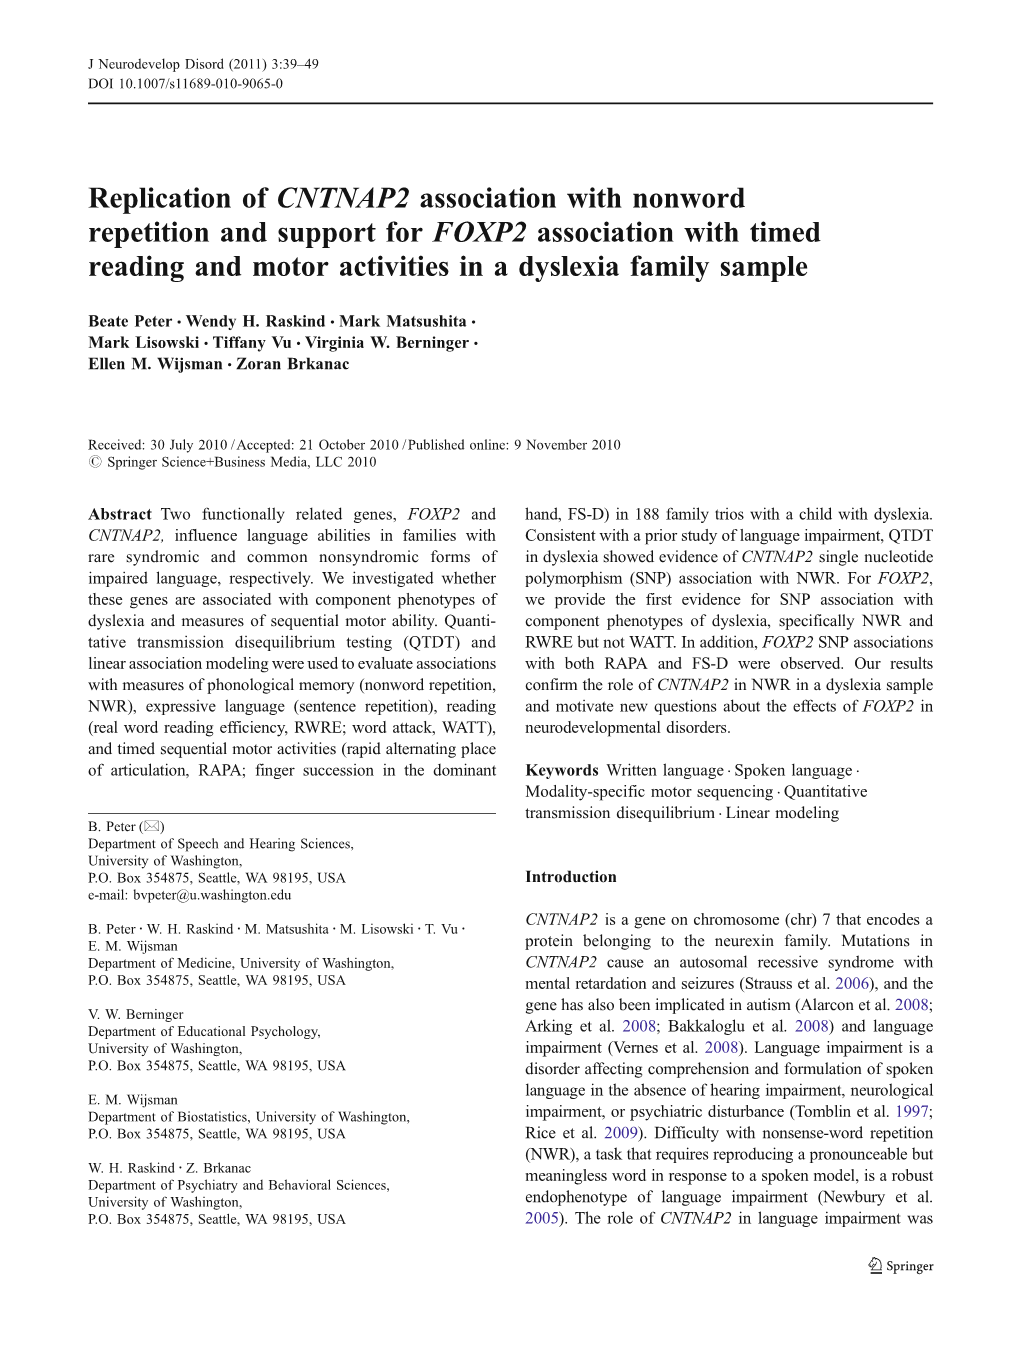 Replication of CNTNAP2 Association with Nonword Repetition and Support for FOXP2 Association with Timed Reading and Motor Activities in a Dyslexia Family Sample